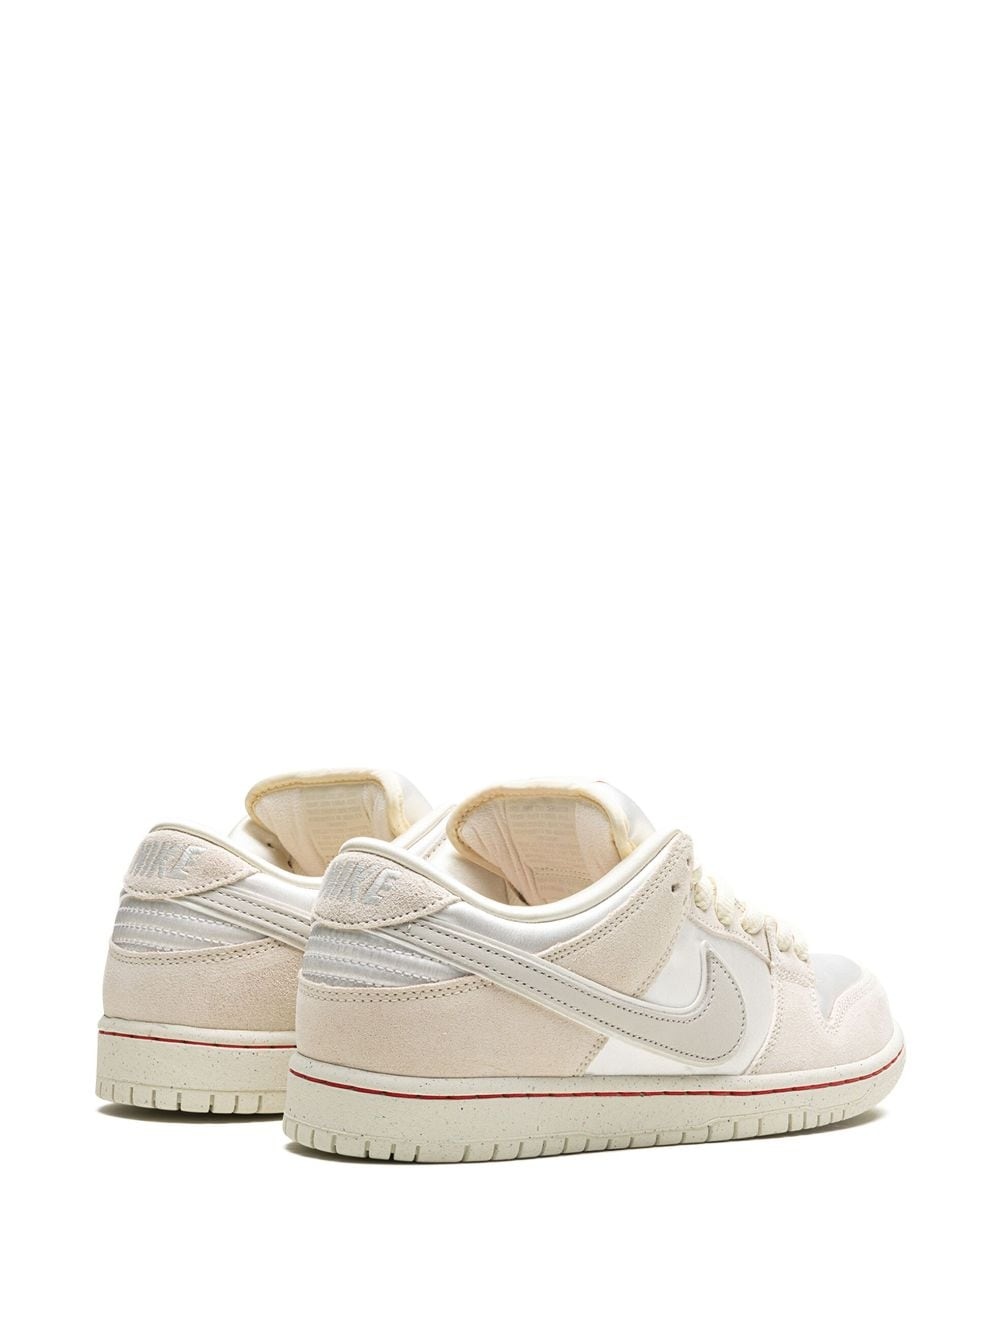 SB Dunk Low "Valentine's Day - Low Love Found" sneakers - 3